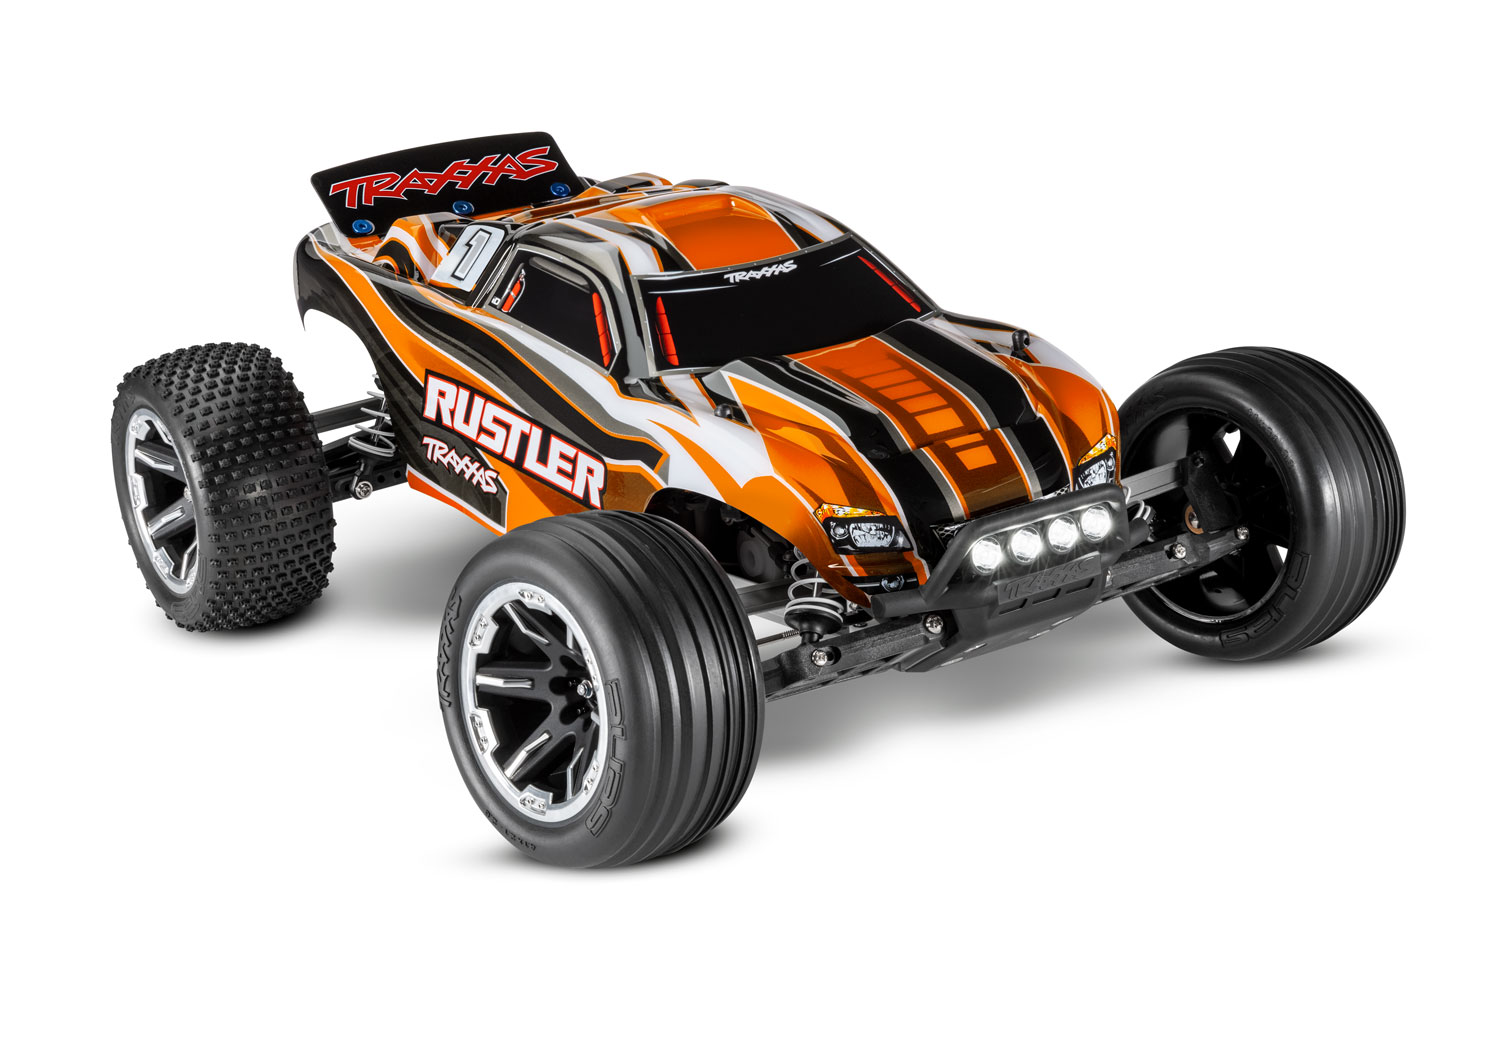 Traxxas Rustler XL5 2WD electro truggy RTR 2.4Ghz met LED verlichting inclusief Power Pack - Oranje